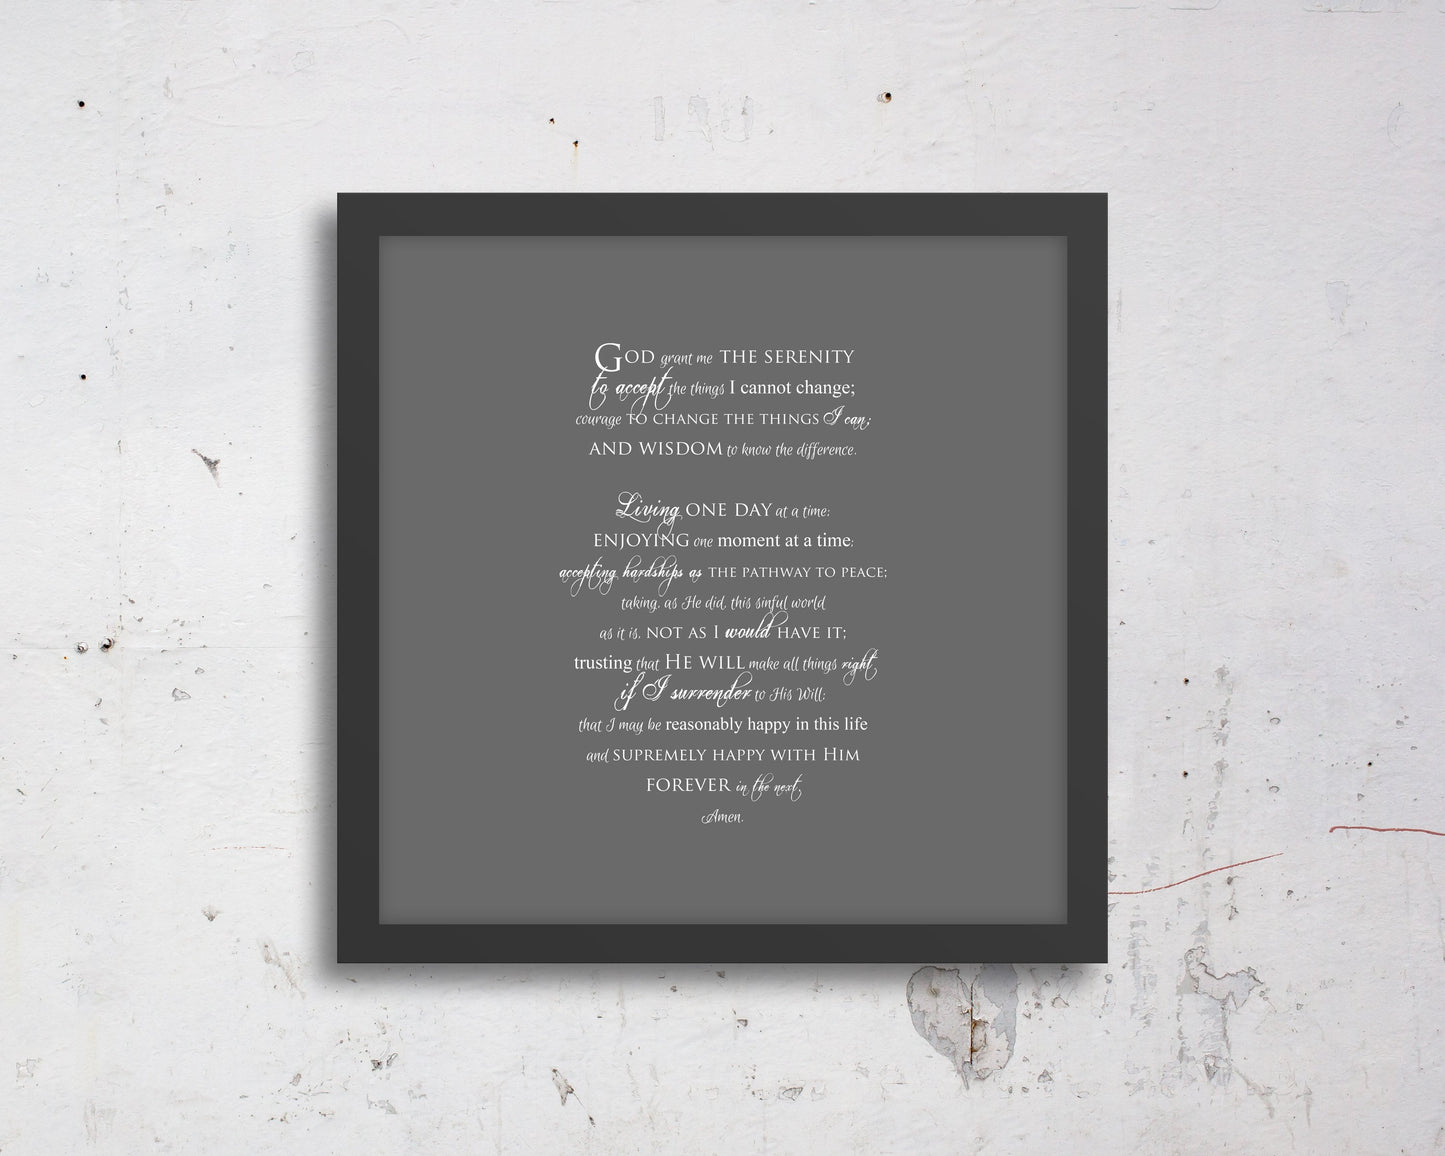 Serenity Prayer, customize, Inspirational, print, Scriptures on canvas, Framed, scripture, gift, gifts, Christmas, for, brother, friend, son